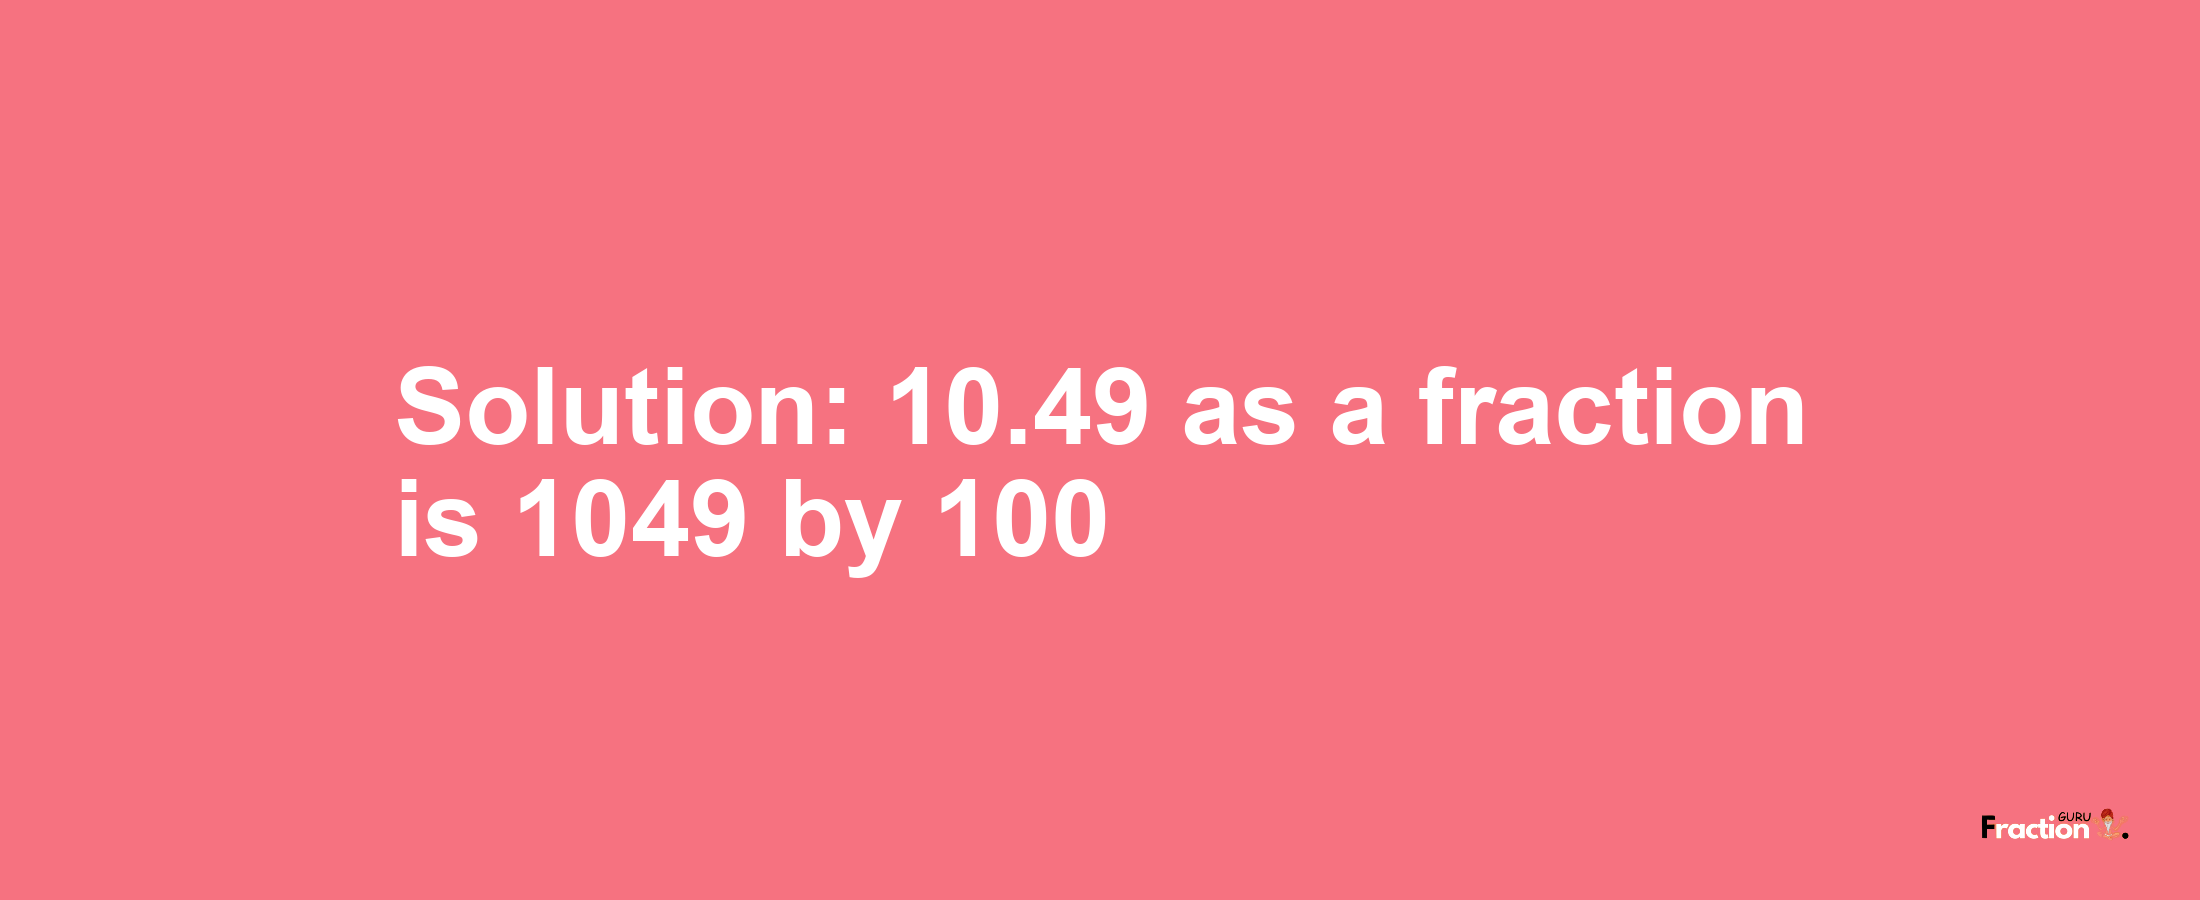 Solution:10.49 as a fraction is 1049/100